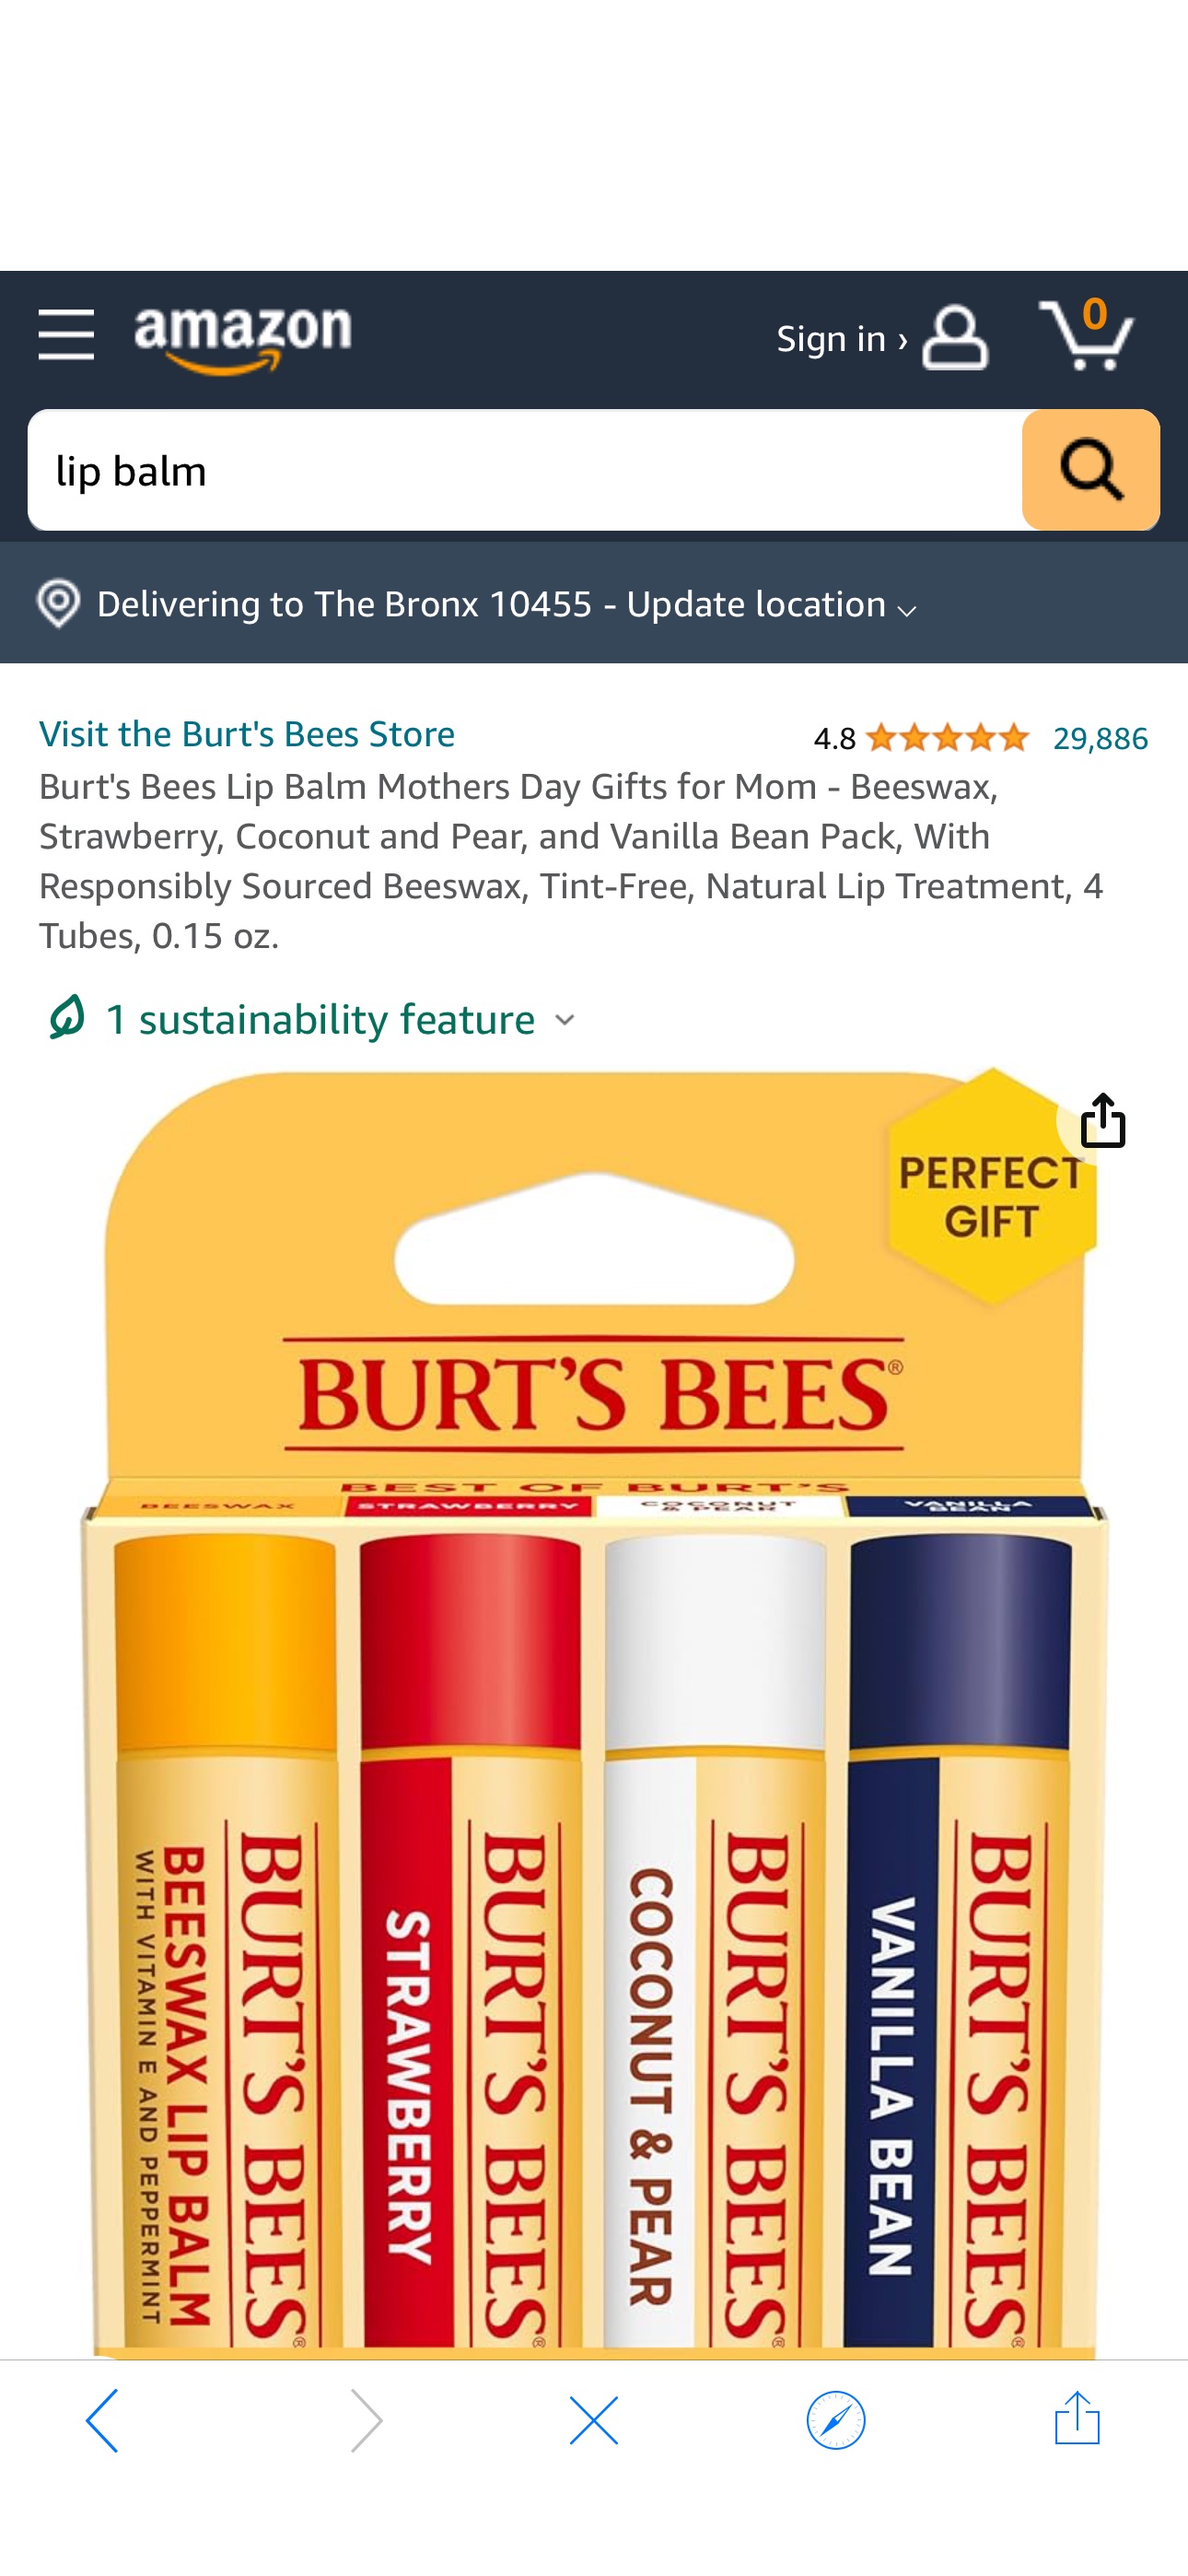 Amazon.com : Burt's Bees Lip Balm Mothers Day Gifts for Mom - Beeswax, Strawberry, Coconut and Pear, and Vanilla Bean Pack, With Responsibly Sourced Beeswax, Tint-Free, Natural Lip Treatment, 4 Tubes,